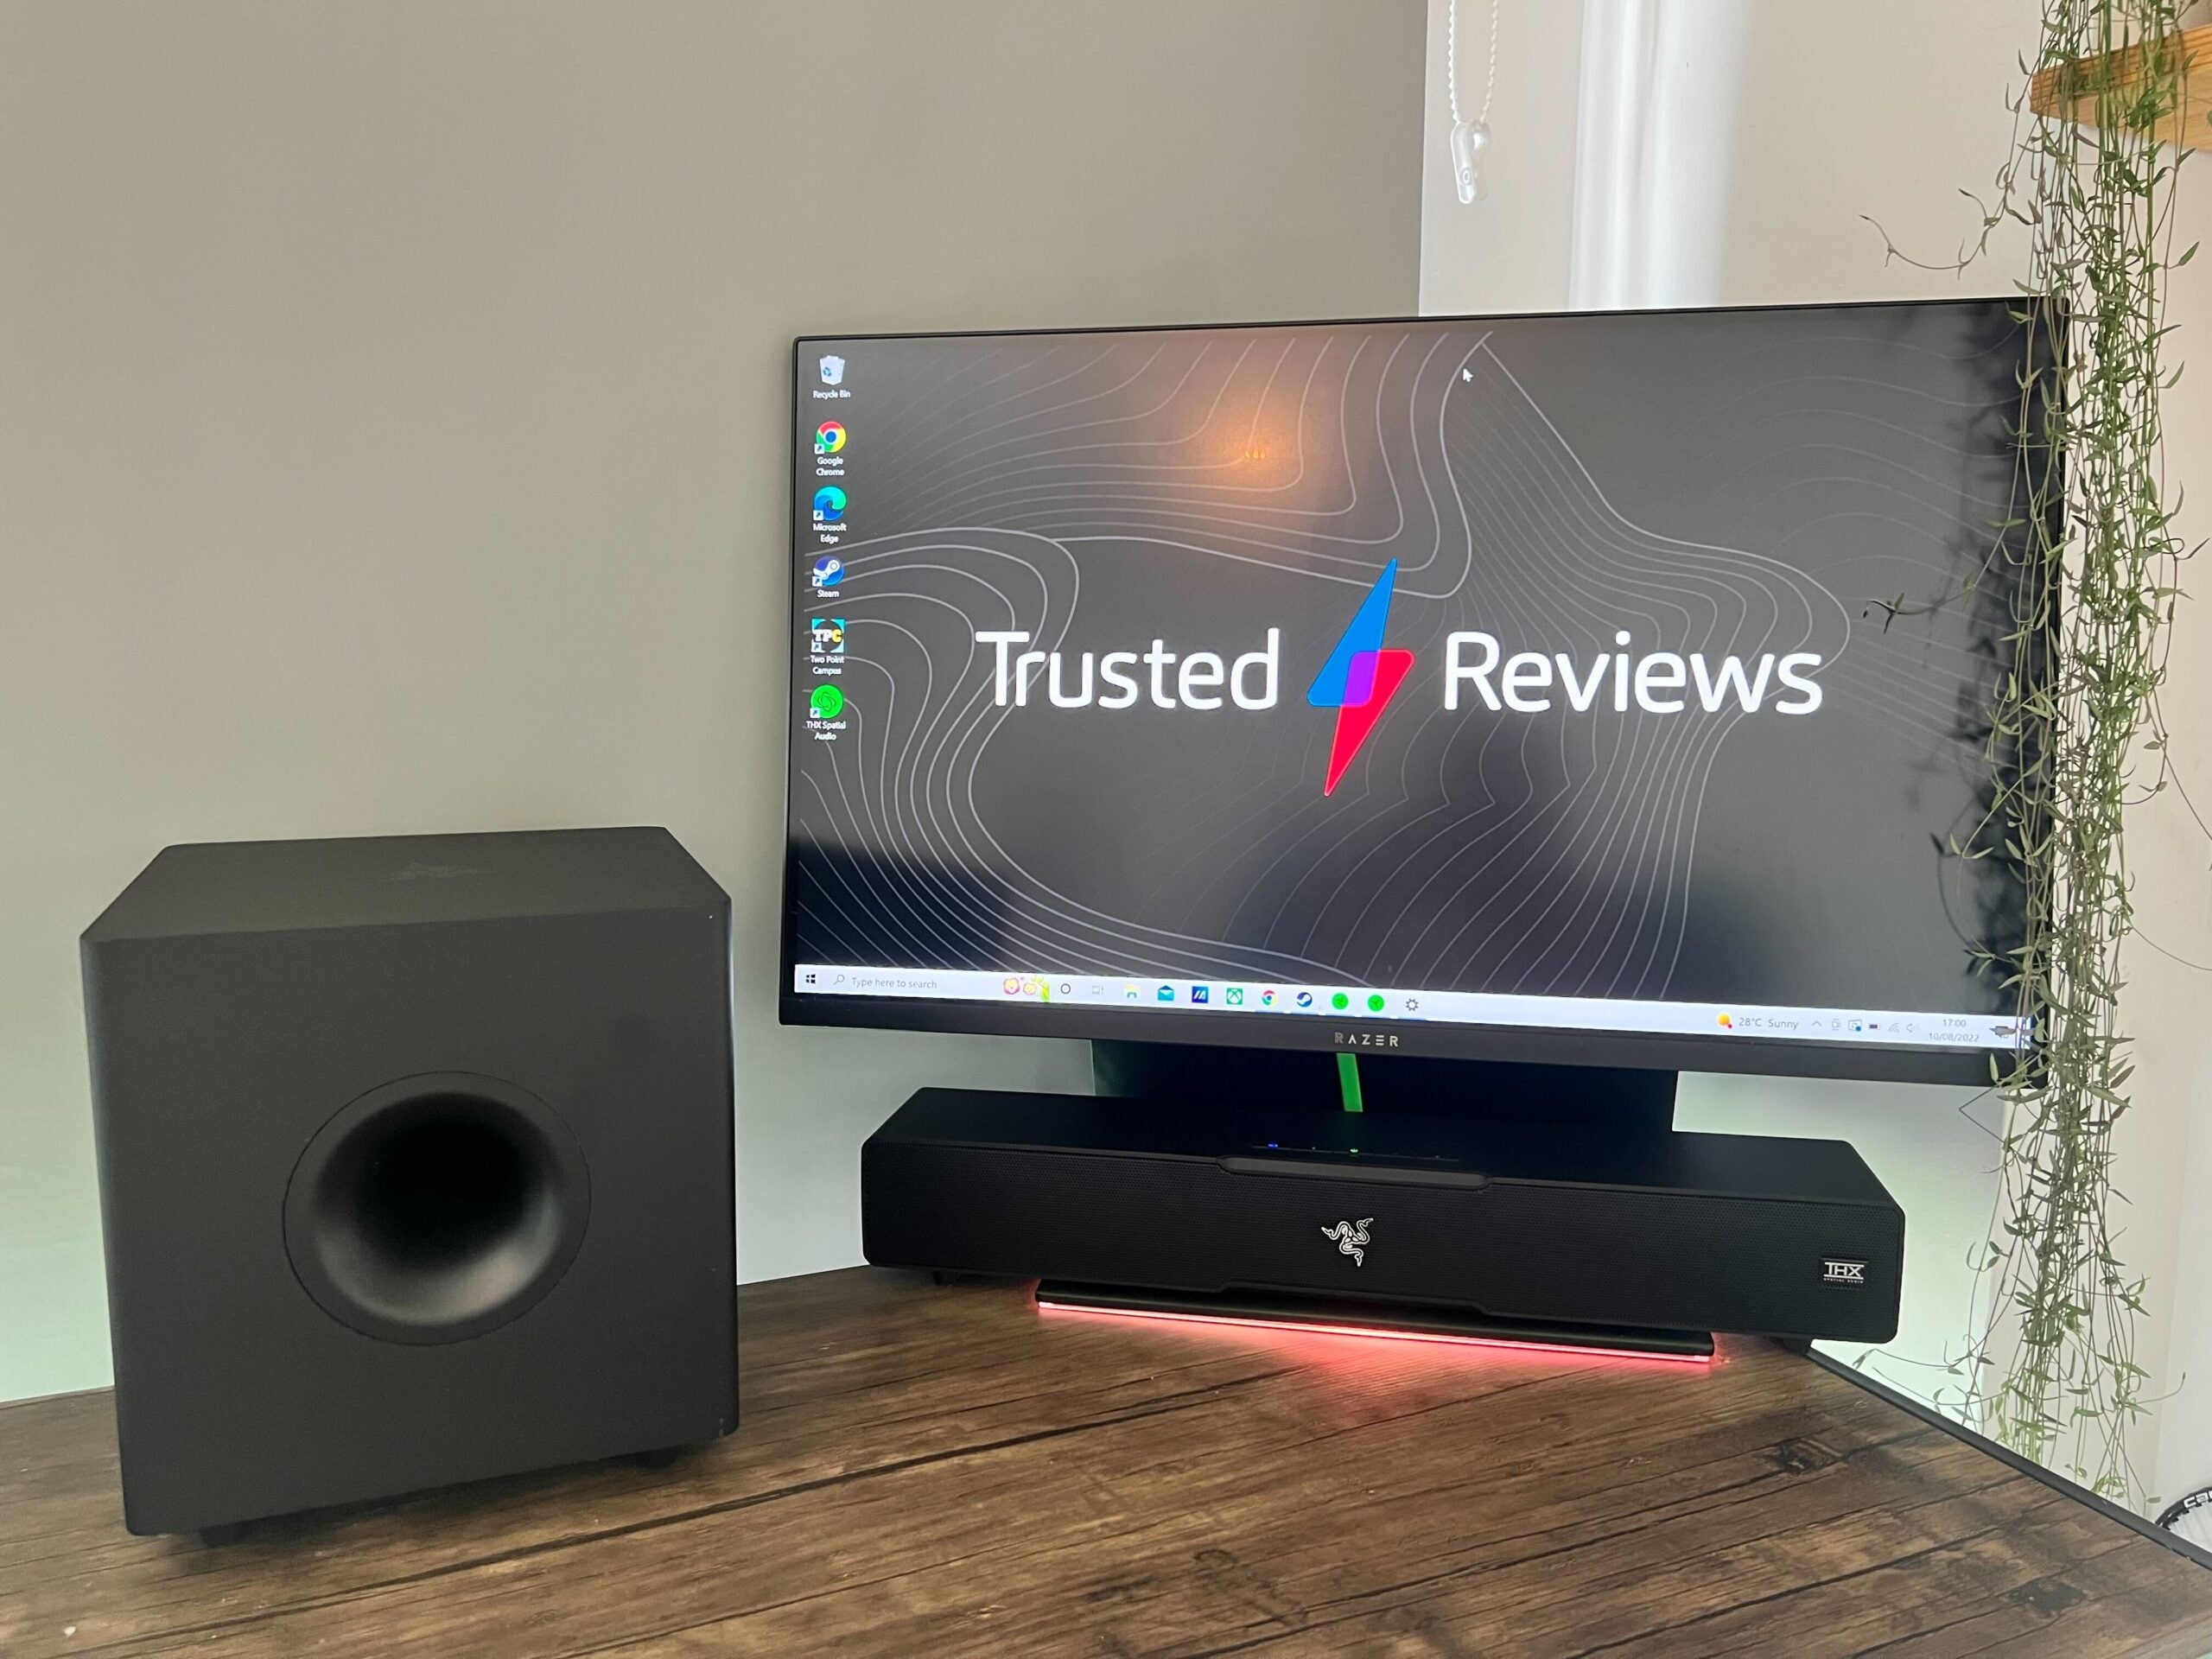 The Razer Leviathan V2 soundbar and subwoofer connected to a monitor